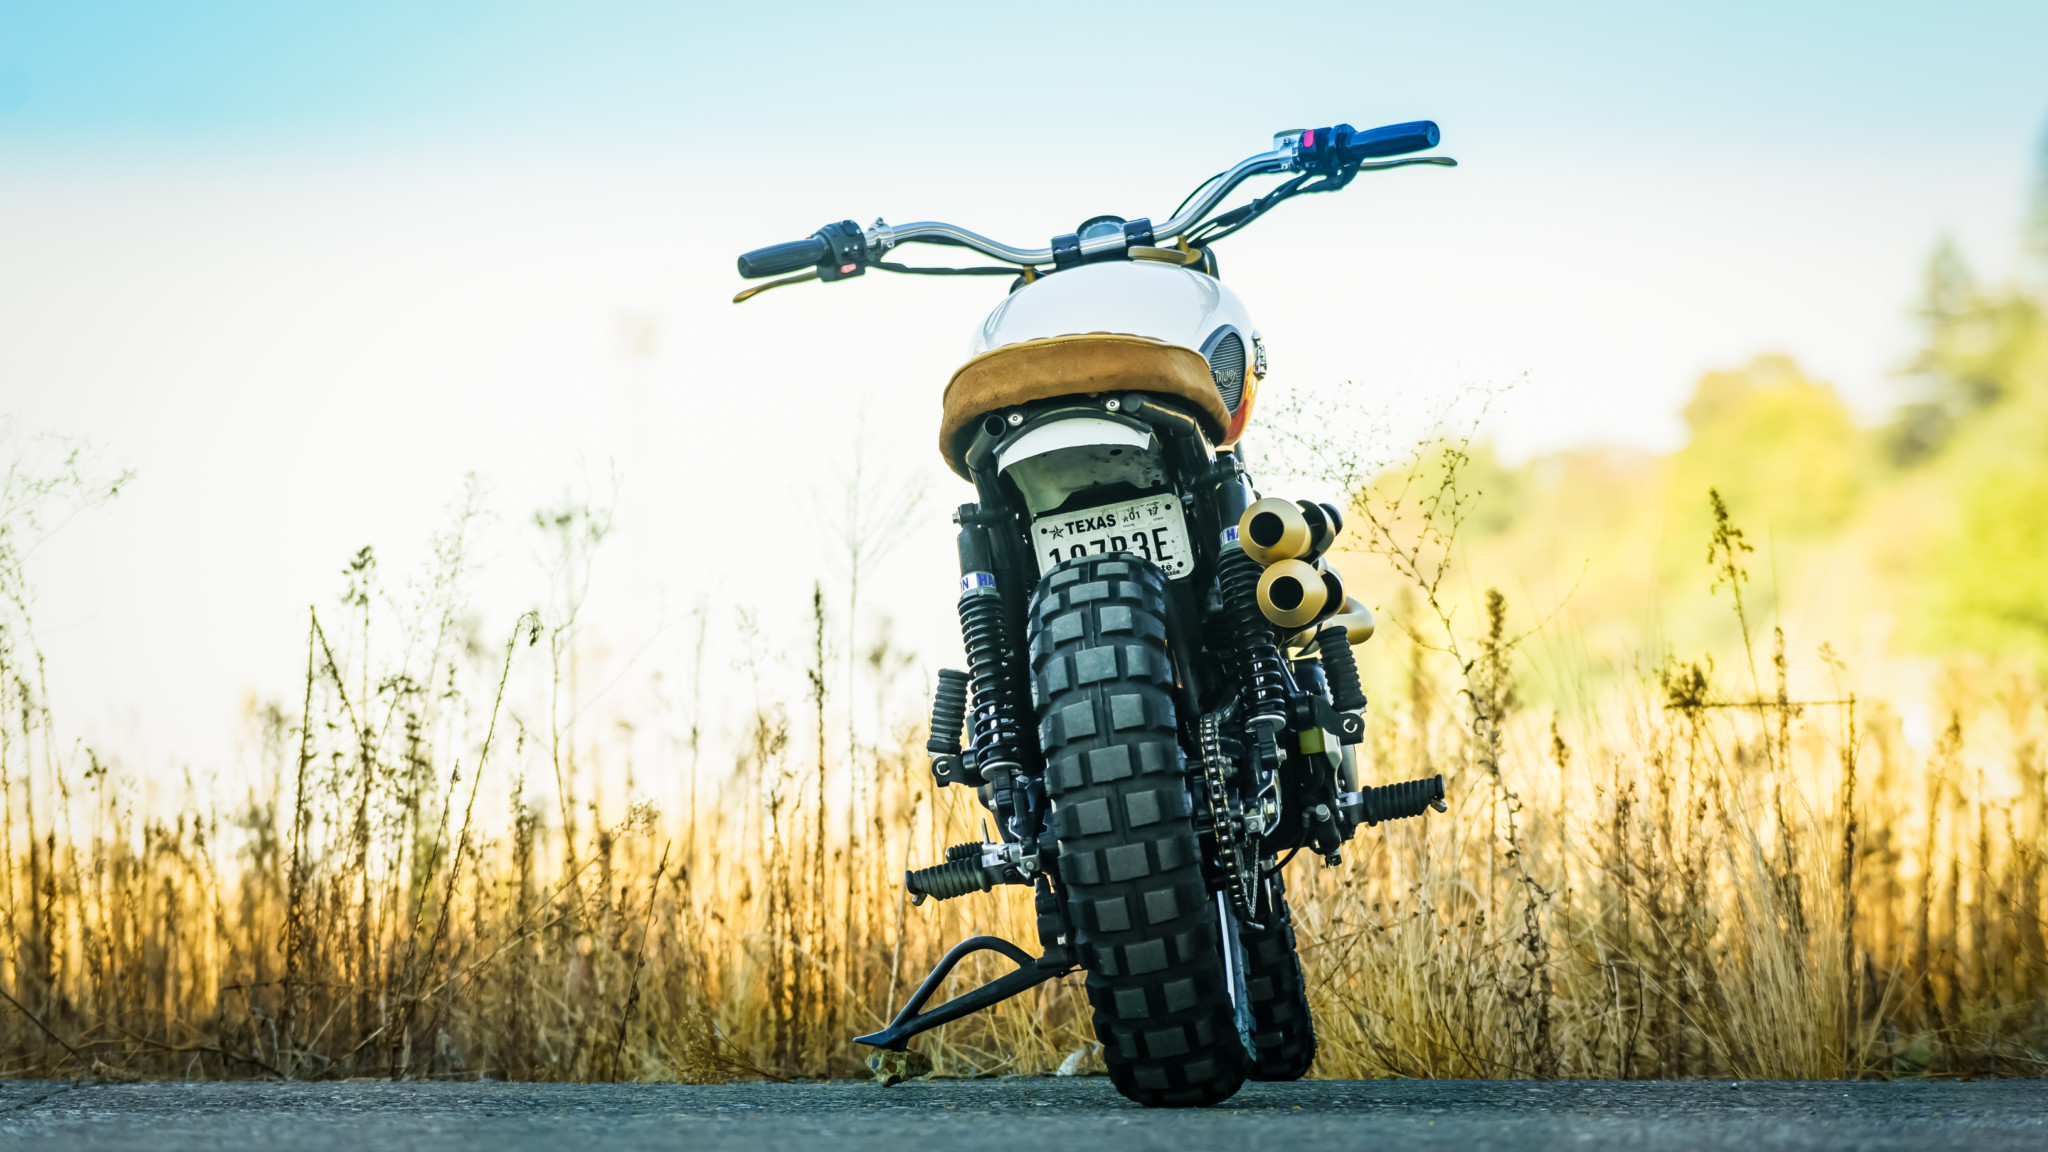 10+ Triumph Scrambler HD Wallpapers and Backgrounds